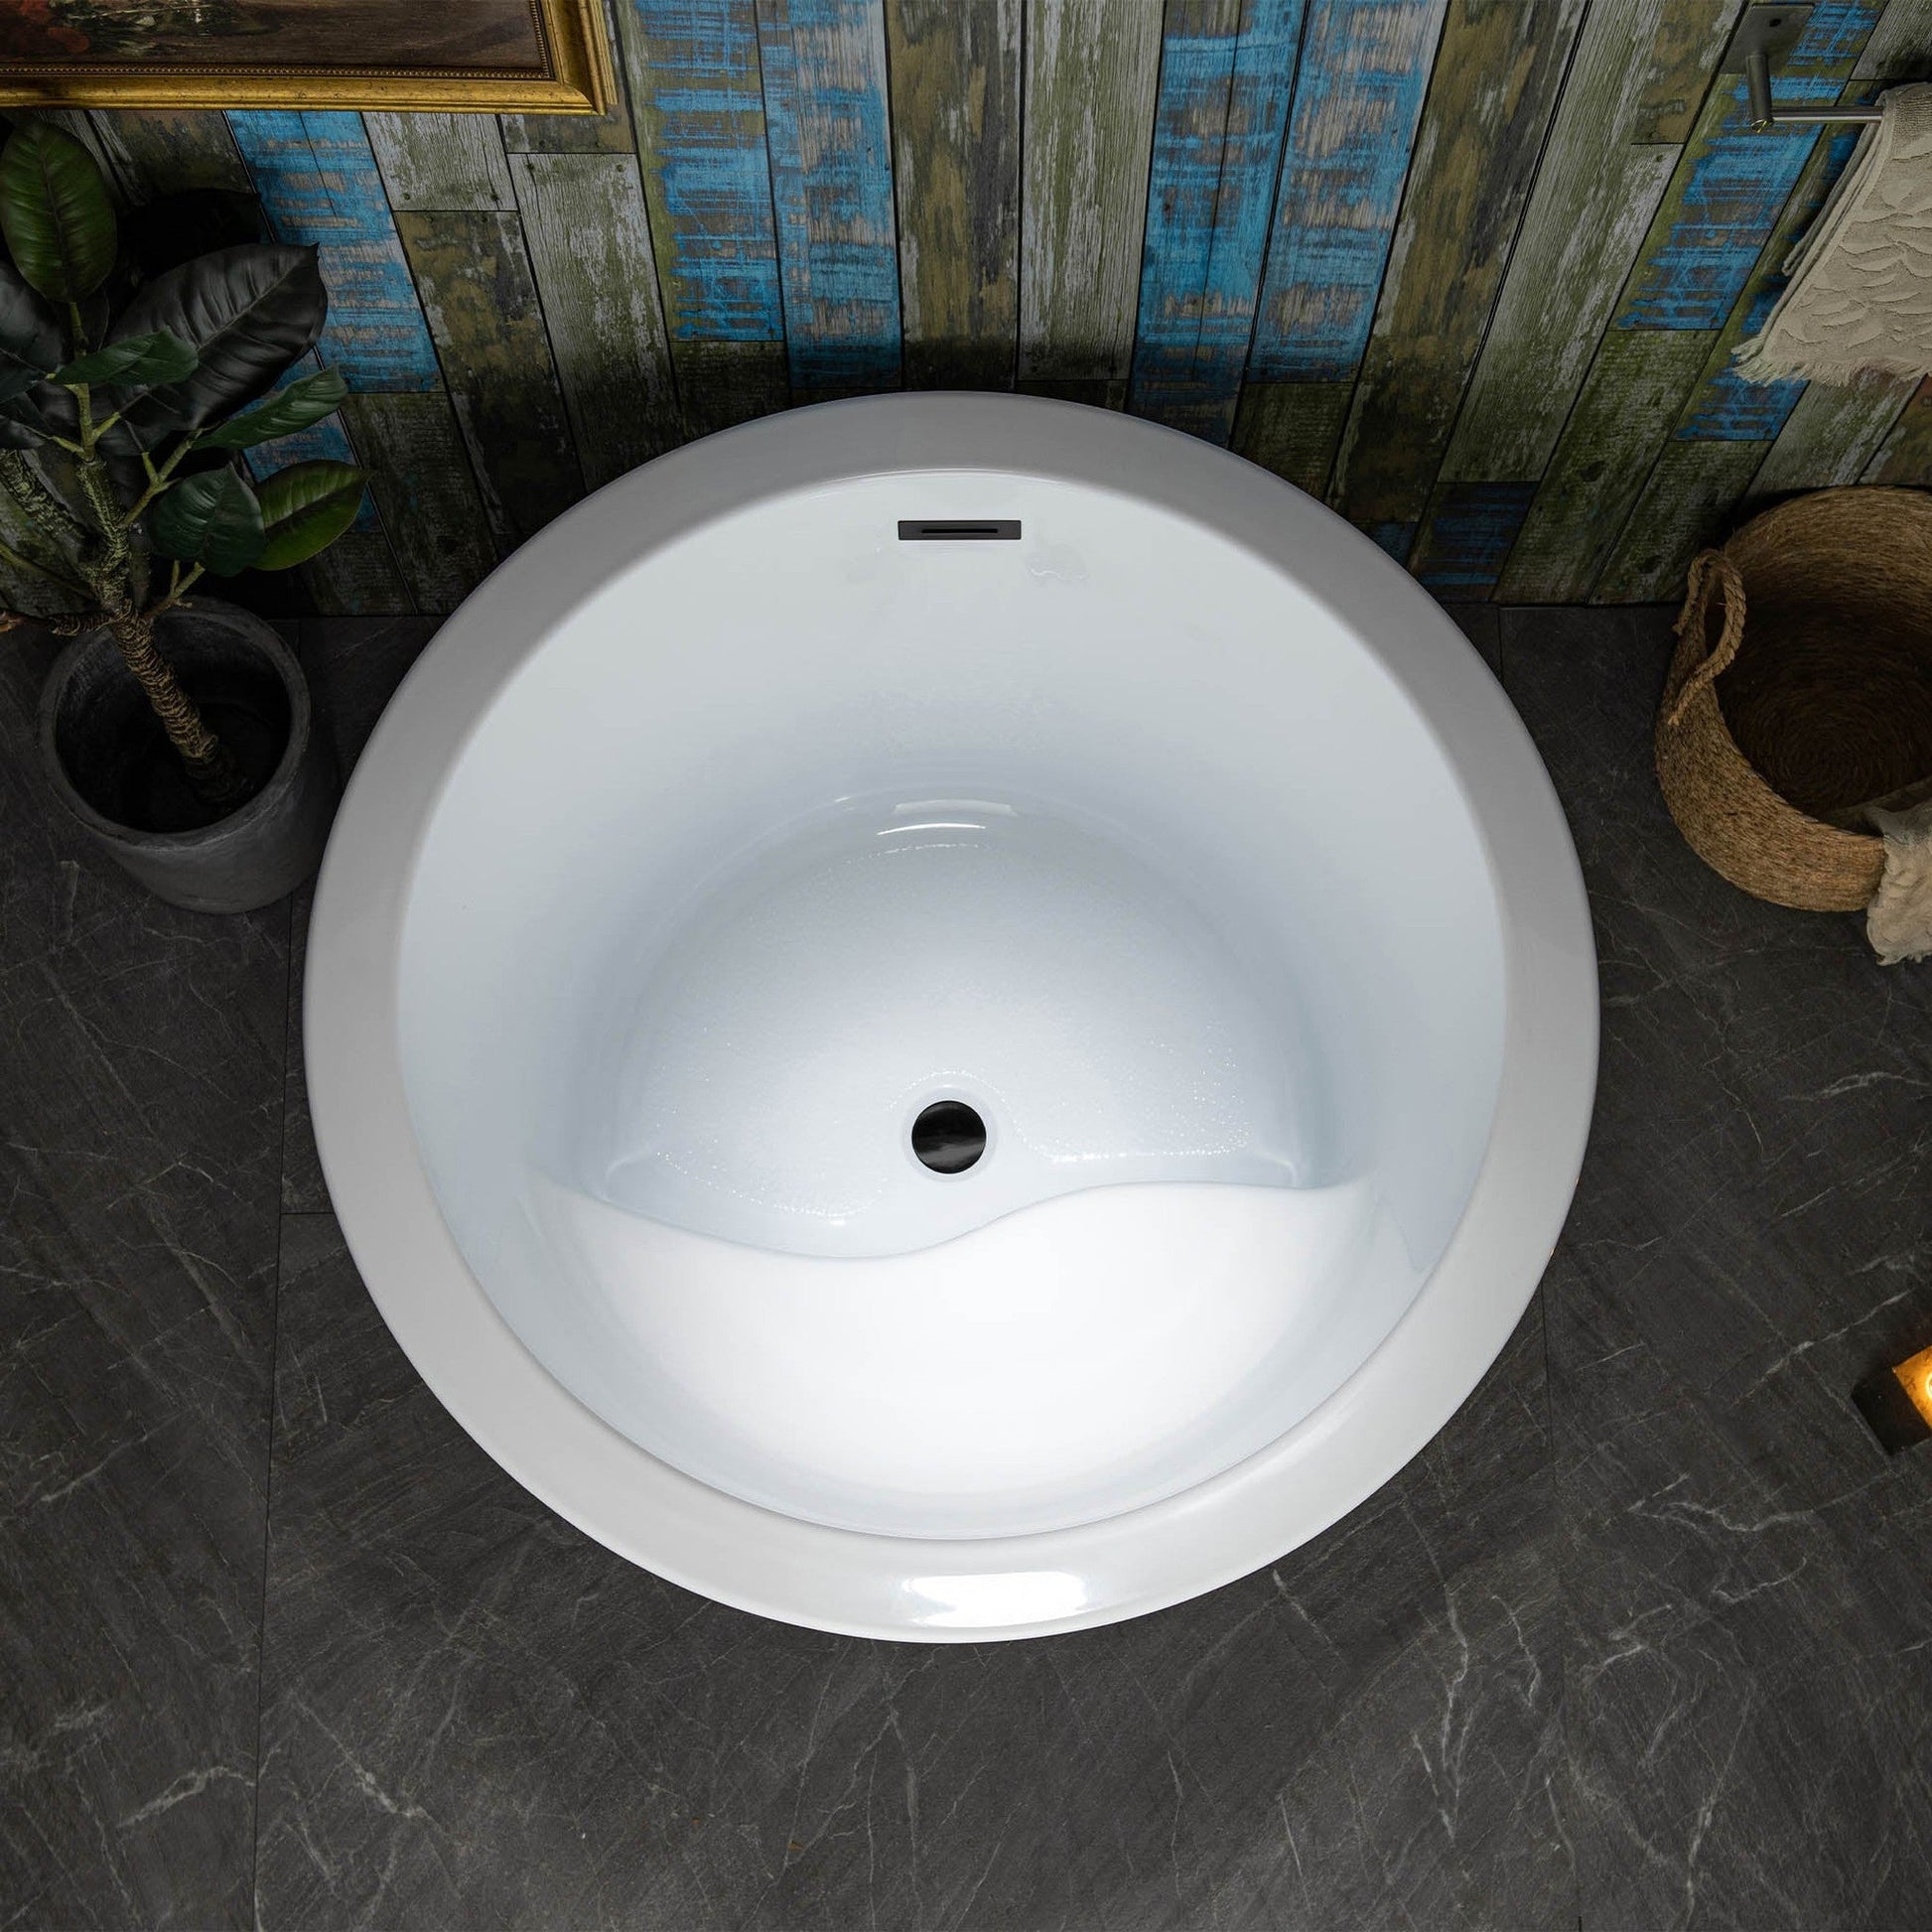 WoodBridge 41" White Acrylic Freestanding Round Contemporary Soaking Tub With Pre-molded Seat and Matte Black Pop-up Drain, Overflow, F0072MBVT Tub Filler and Caddy Tray